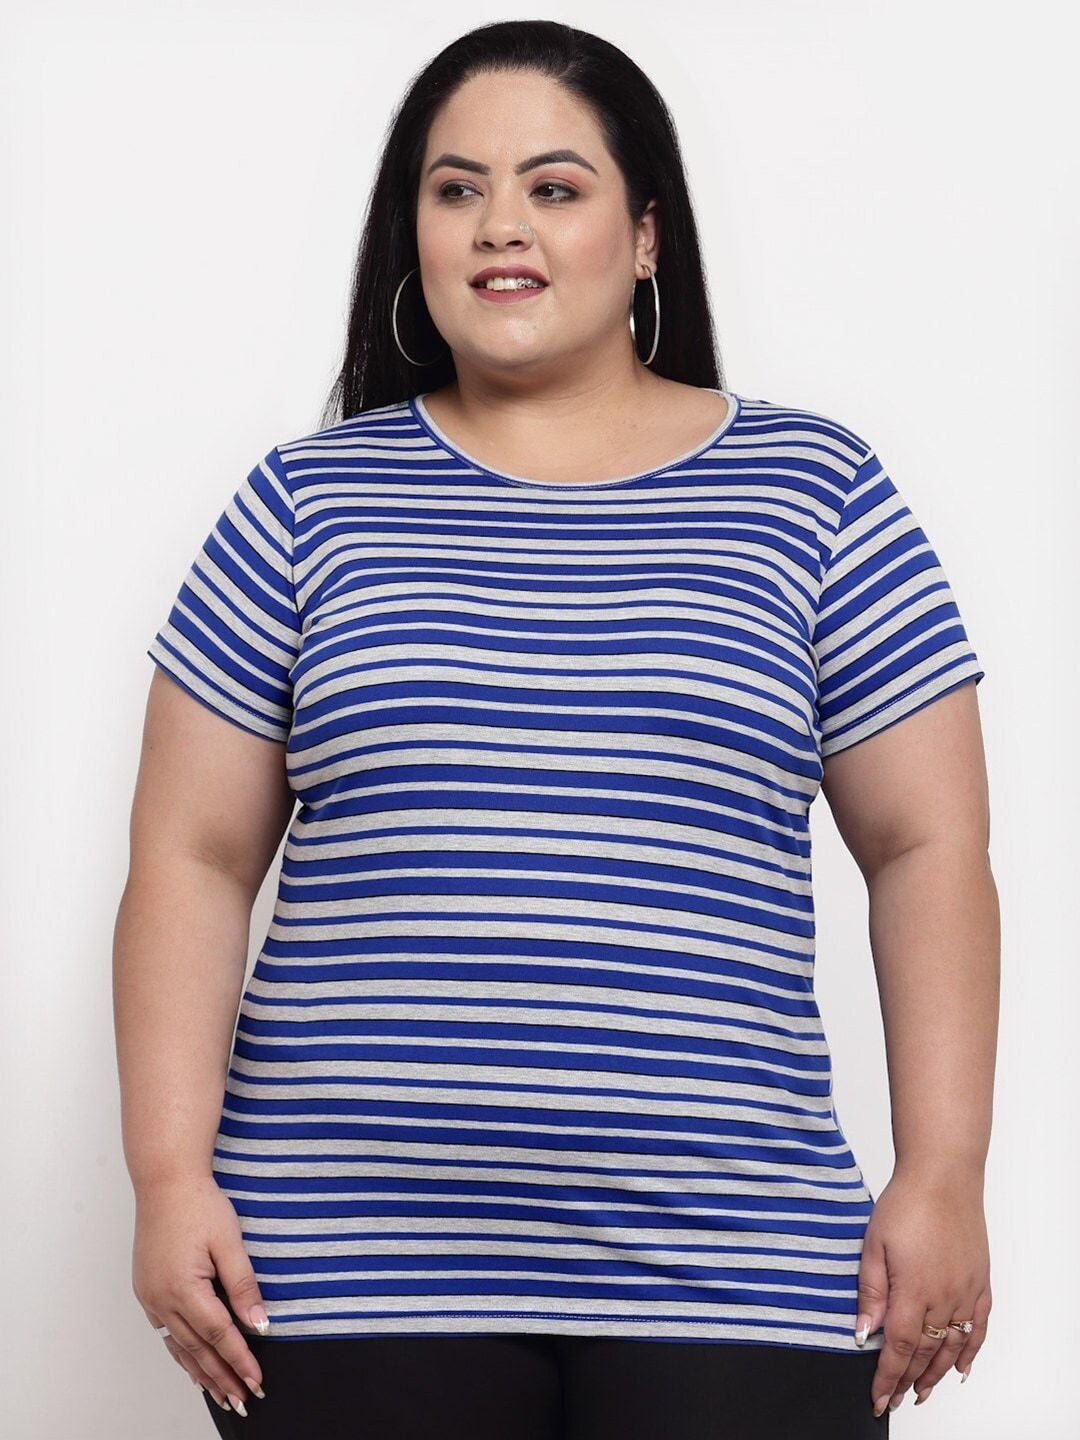 32 DEGREES Women Plus-Size Cool Scoop T-Shirt India